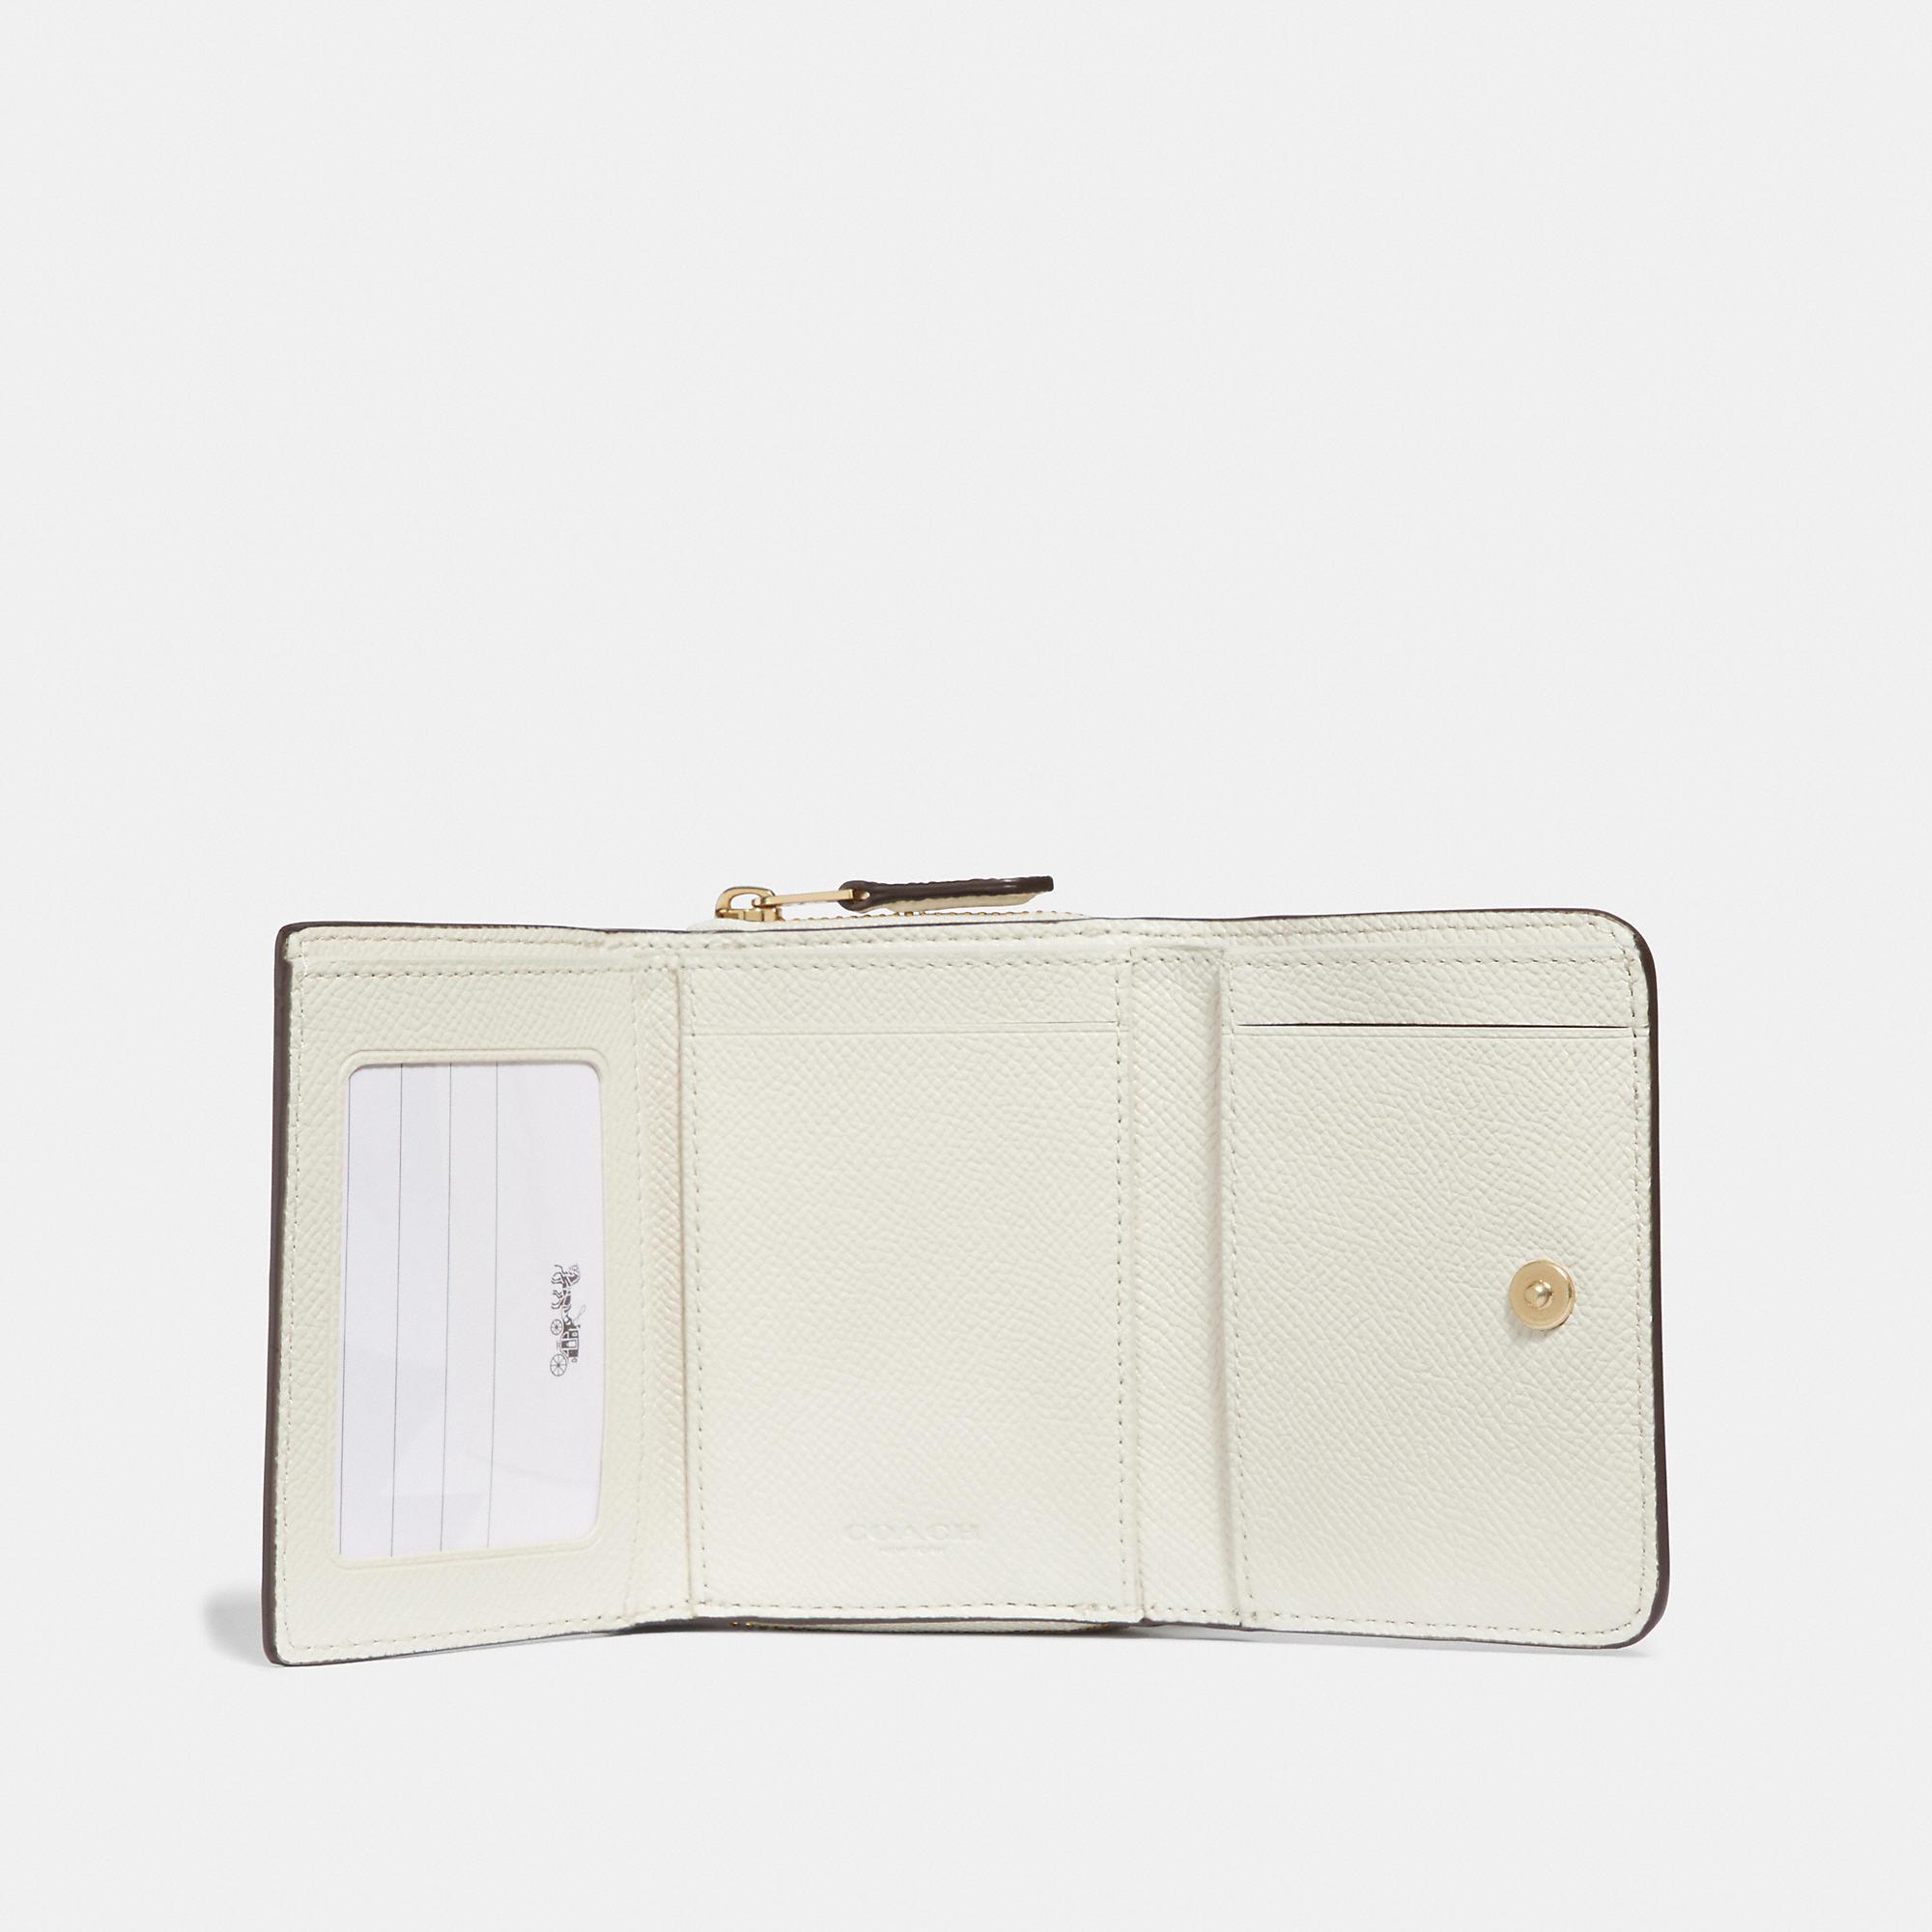 COACH Small Trifold Wallet in Metallic | Lyst